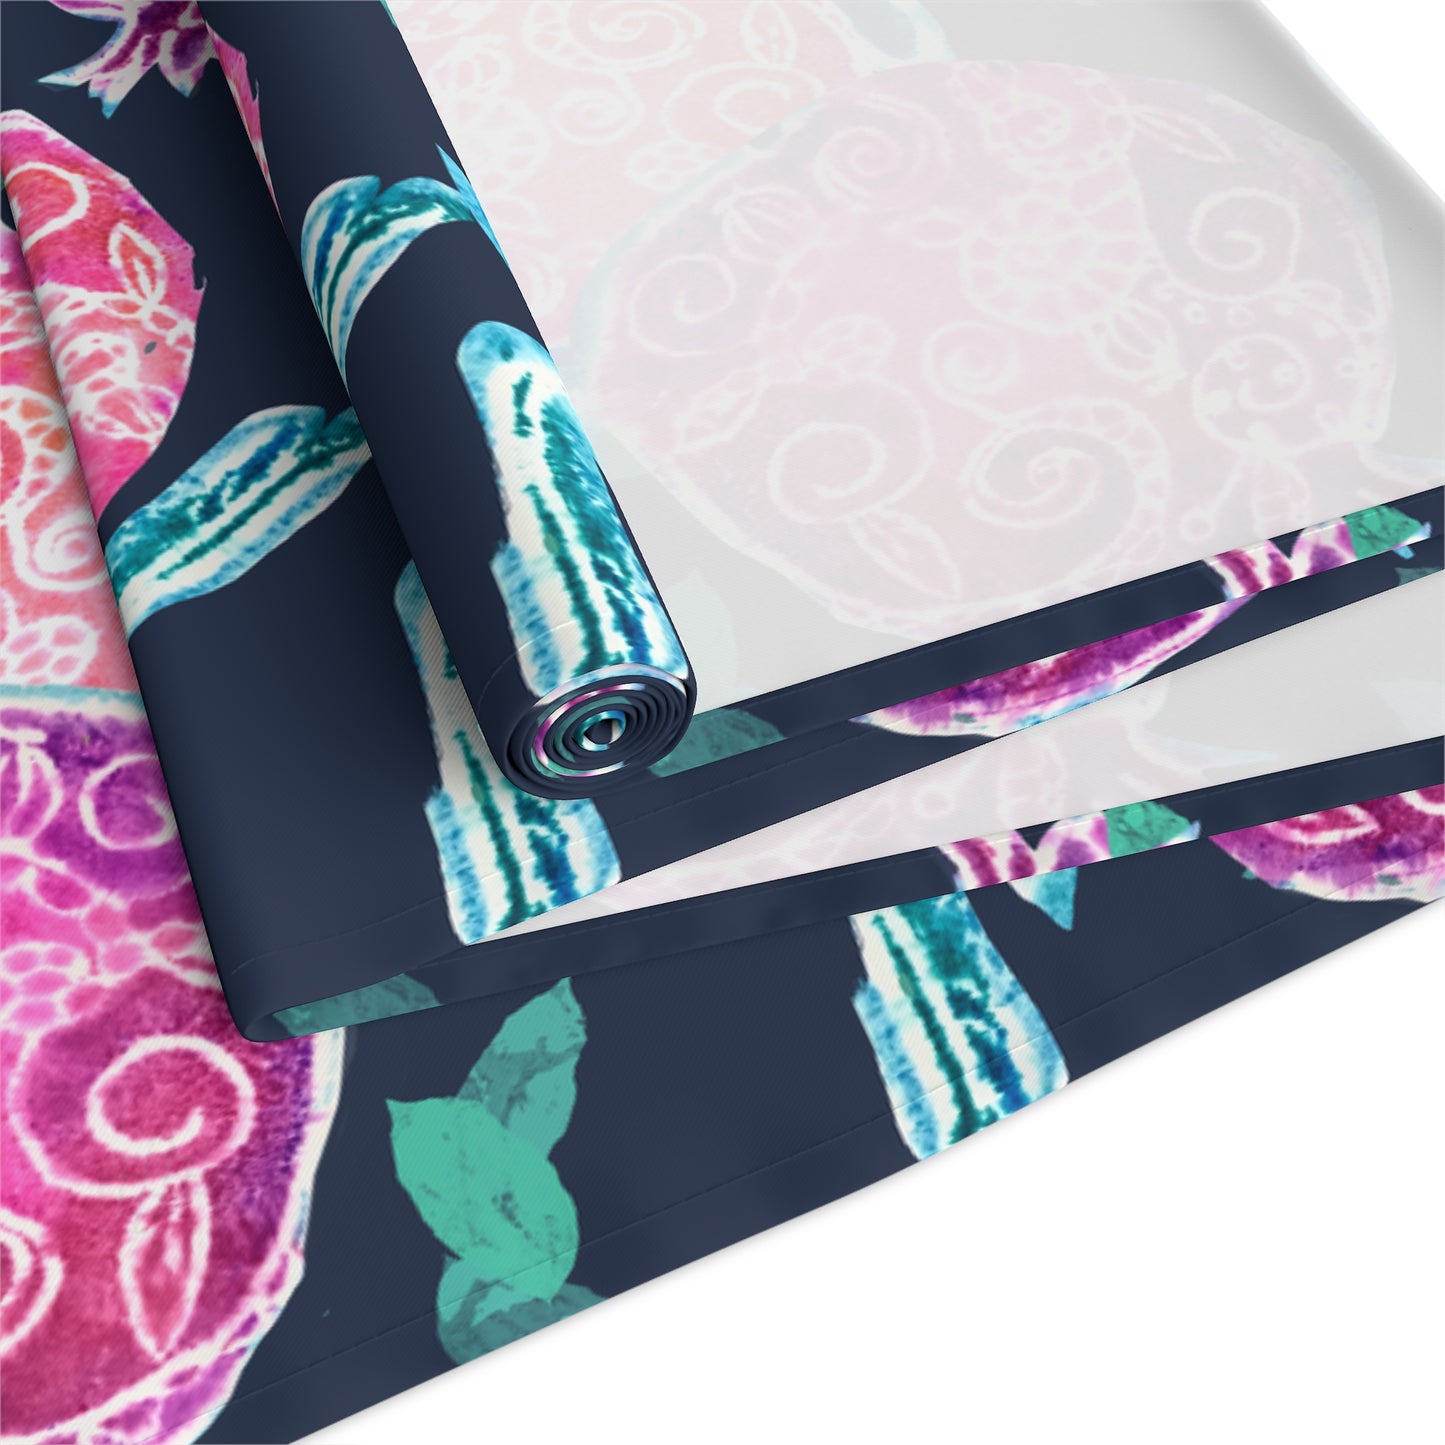 “Pomegranate Whimsy” by Leah Luria Table Runner (Cotton, Poly)